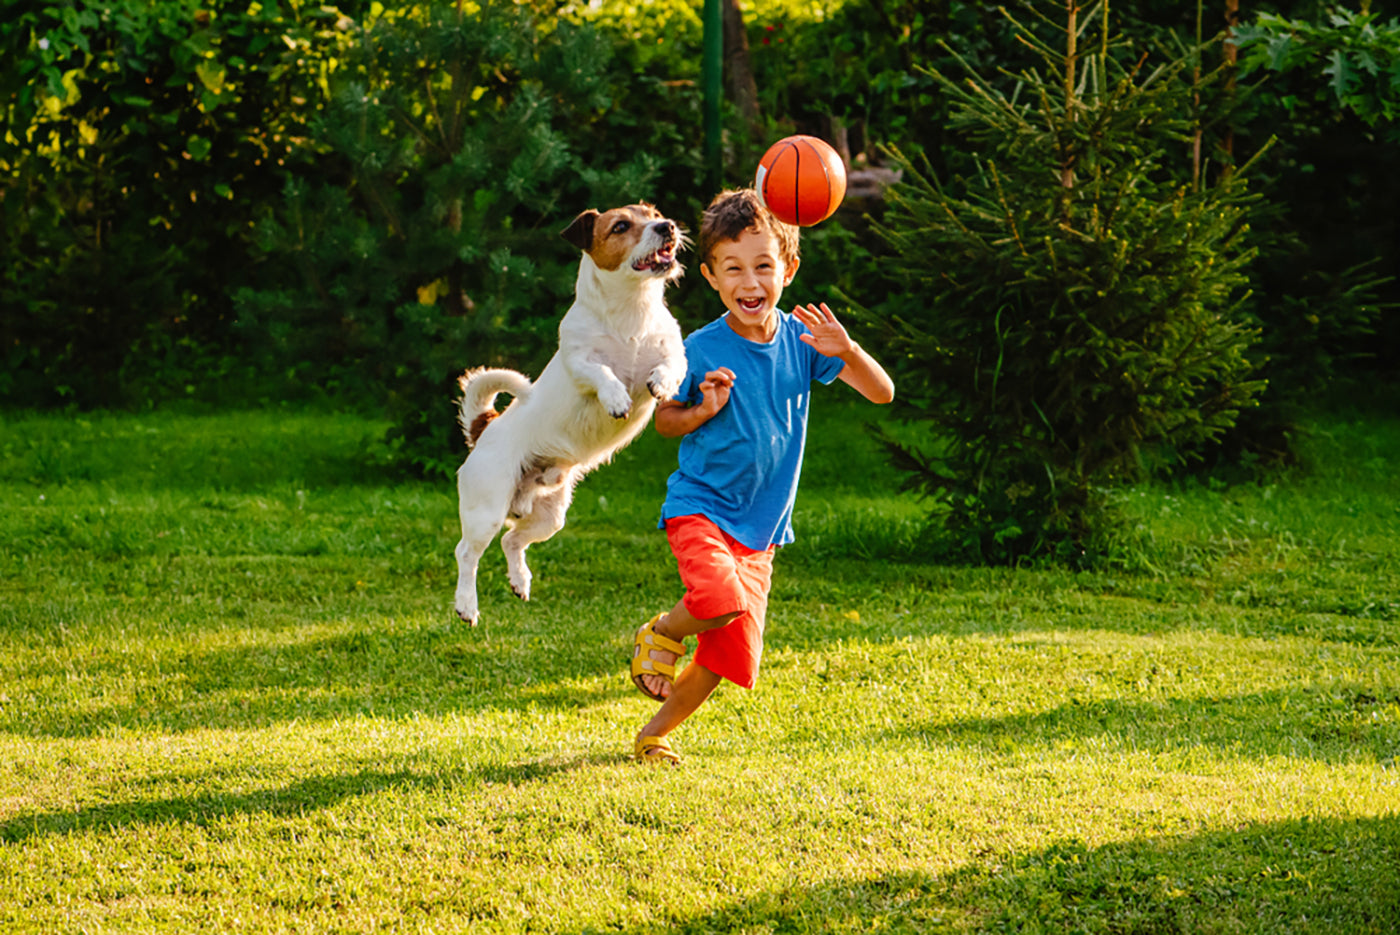 a child playing with a dog and a ball